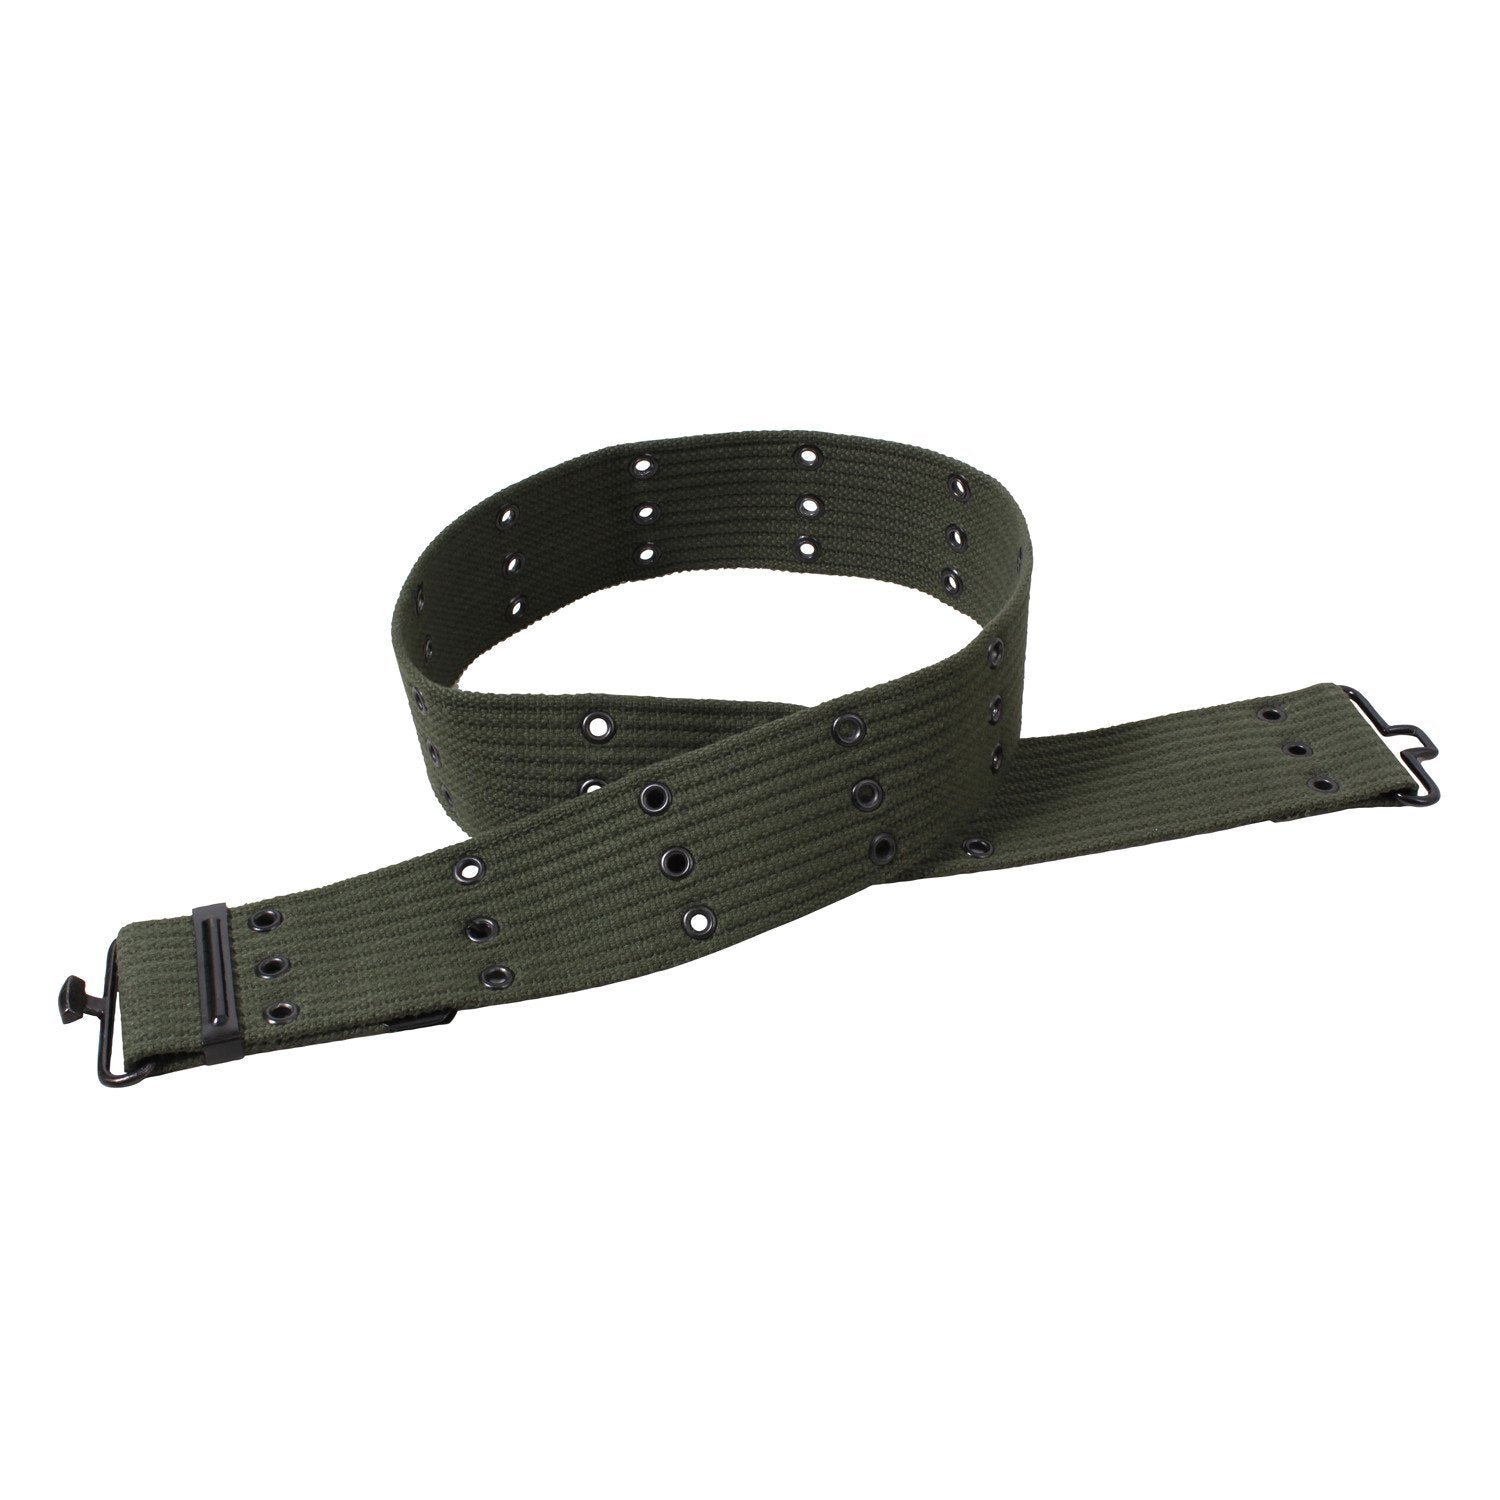 Rothco Military Style OD Pistol Belts (BEPC)